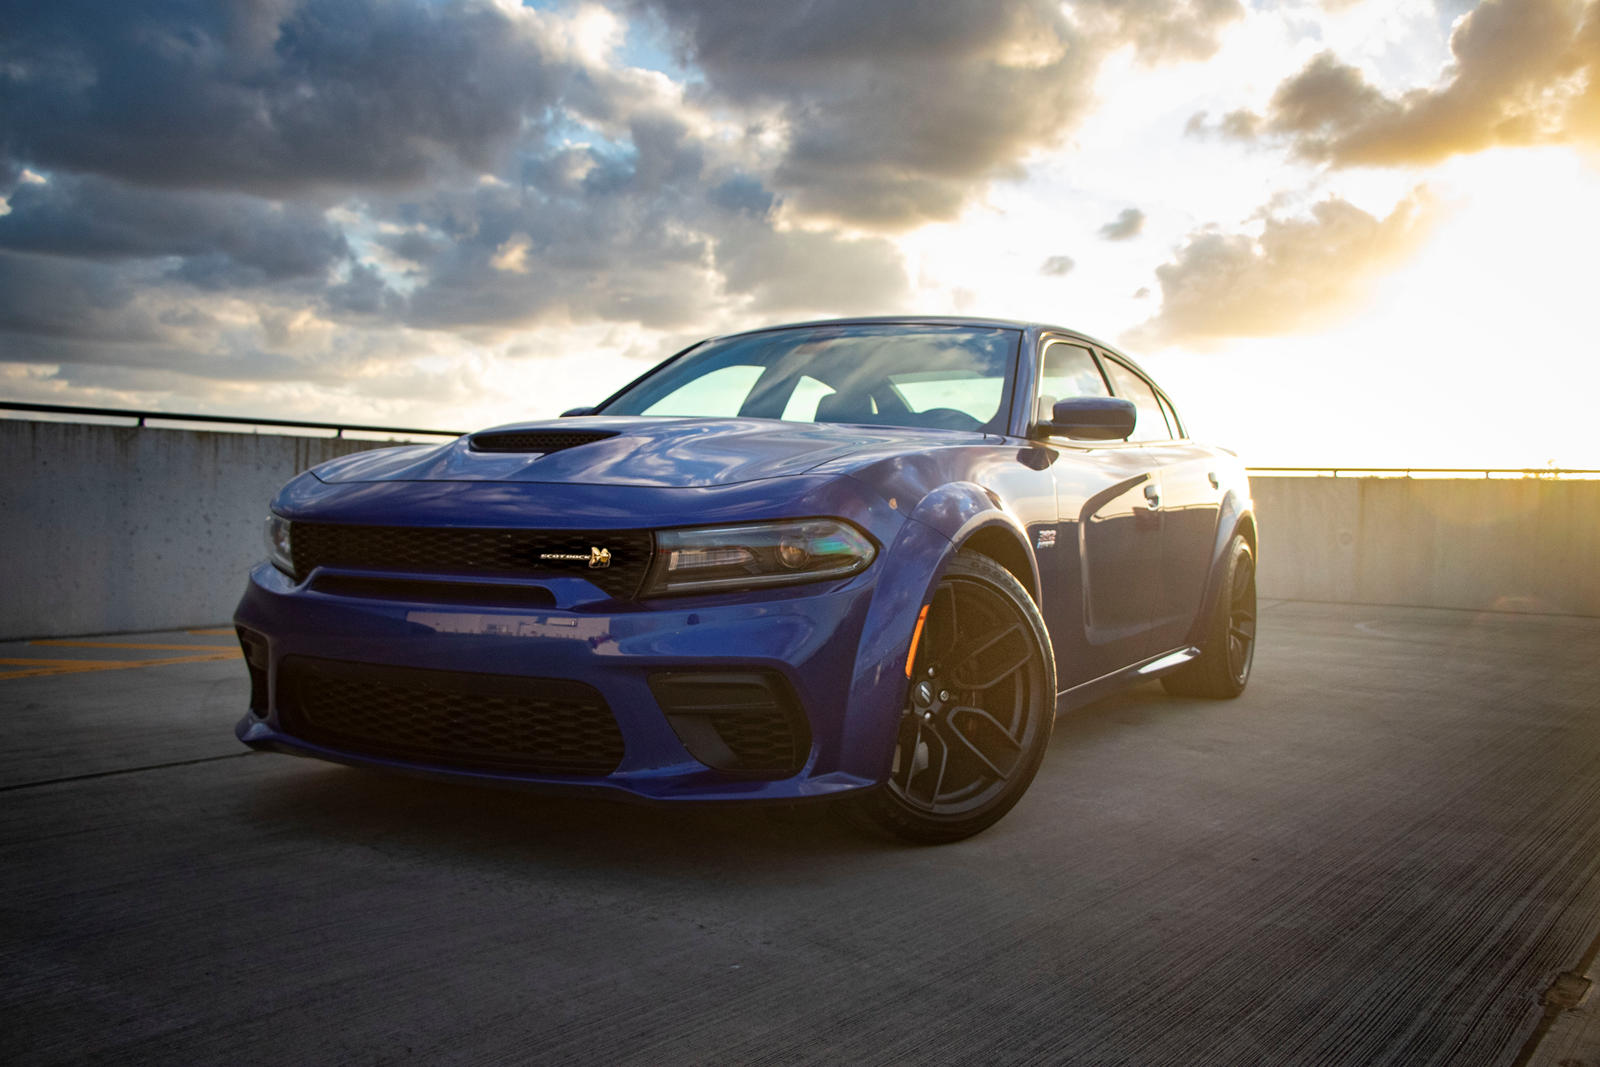 2011 Dodge Charger Price, Value, Ratings & Reviews